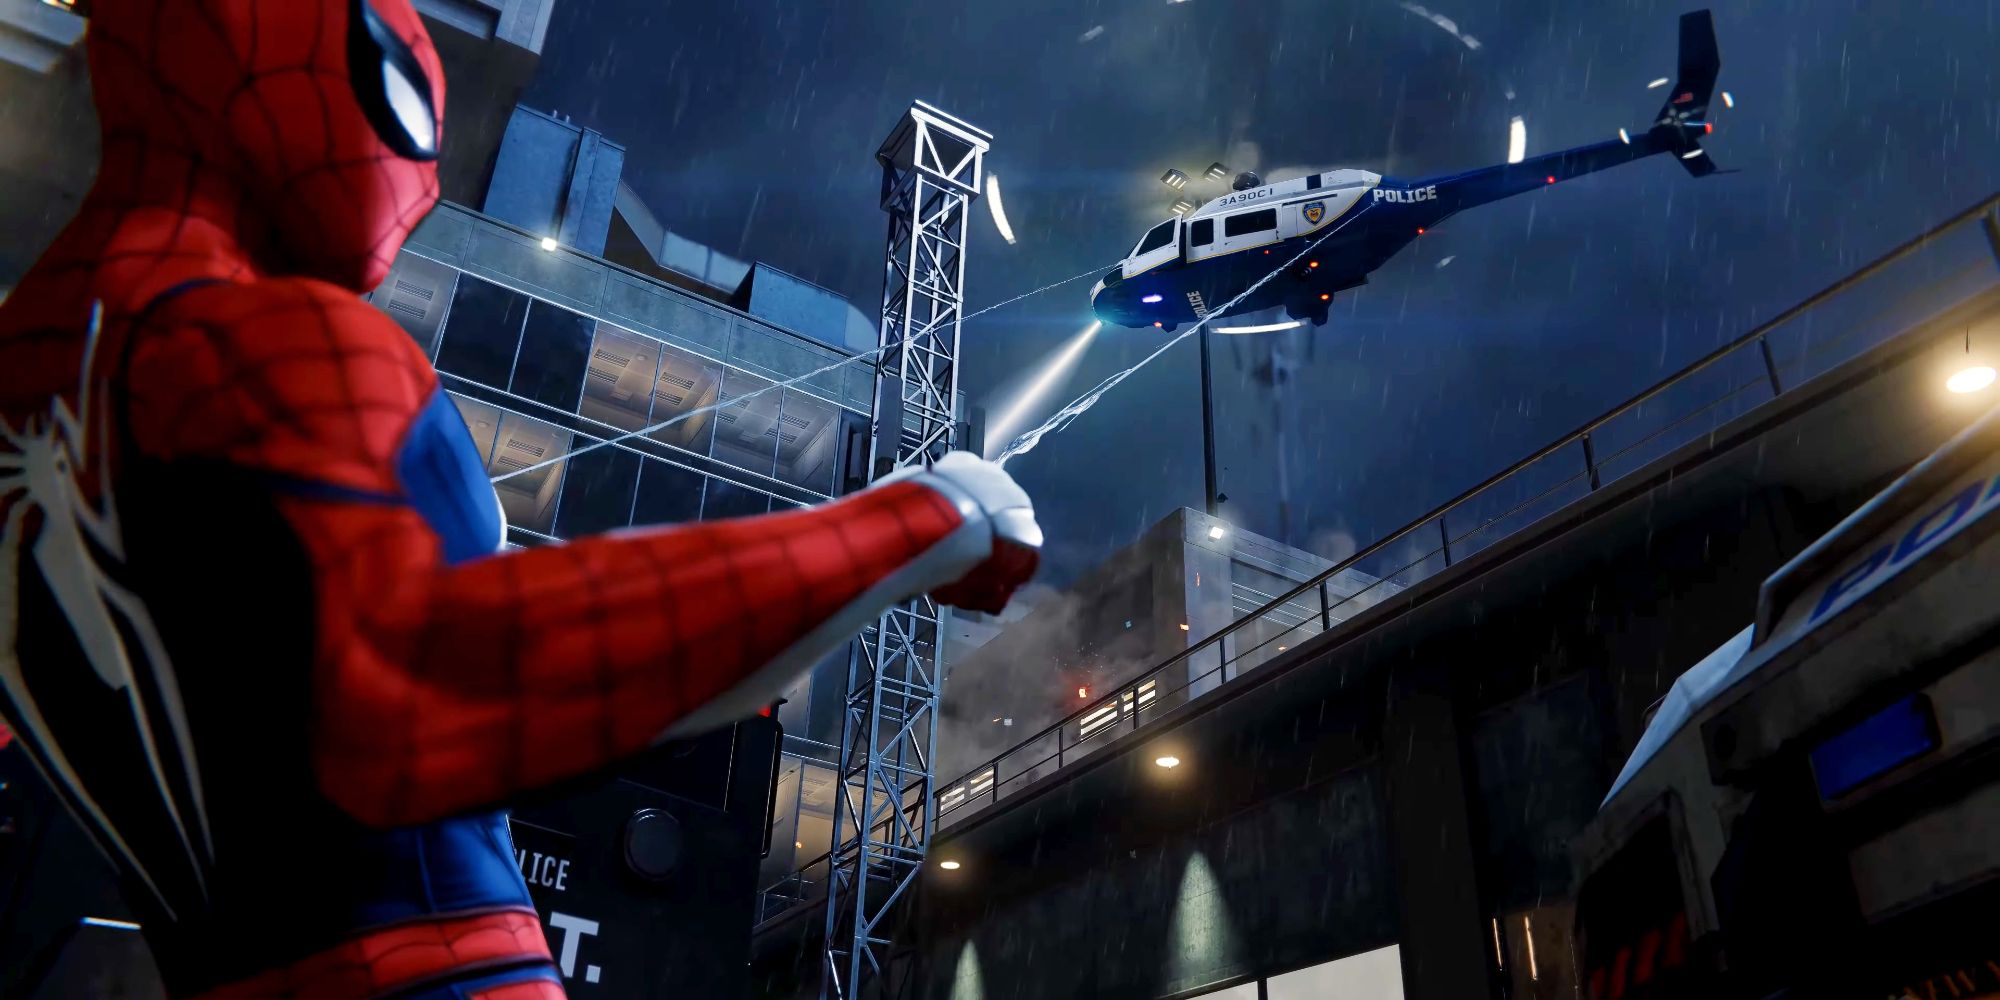 Spider-Man pulls down a police helicopter with his webs in Marvel's Spider-Man